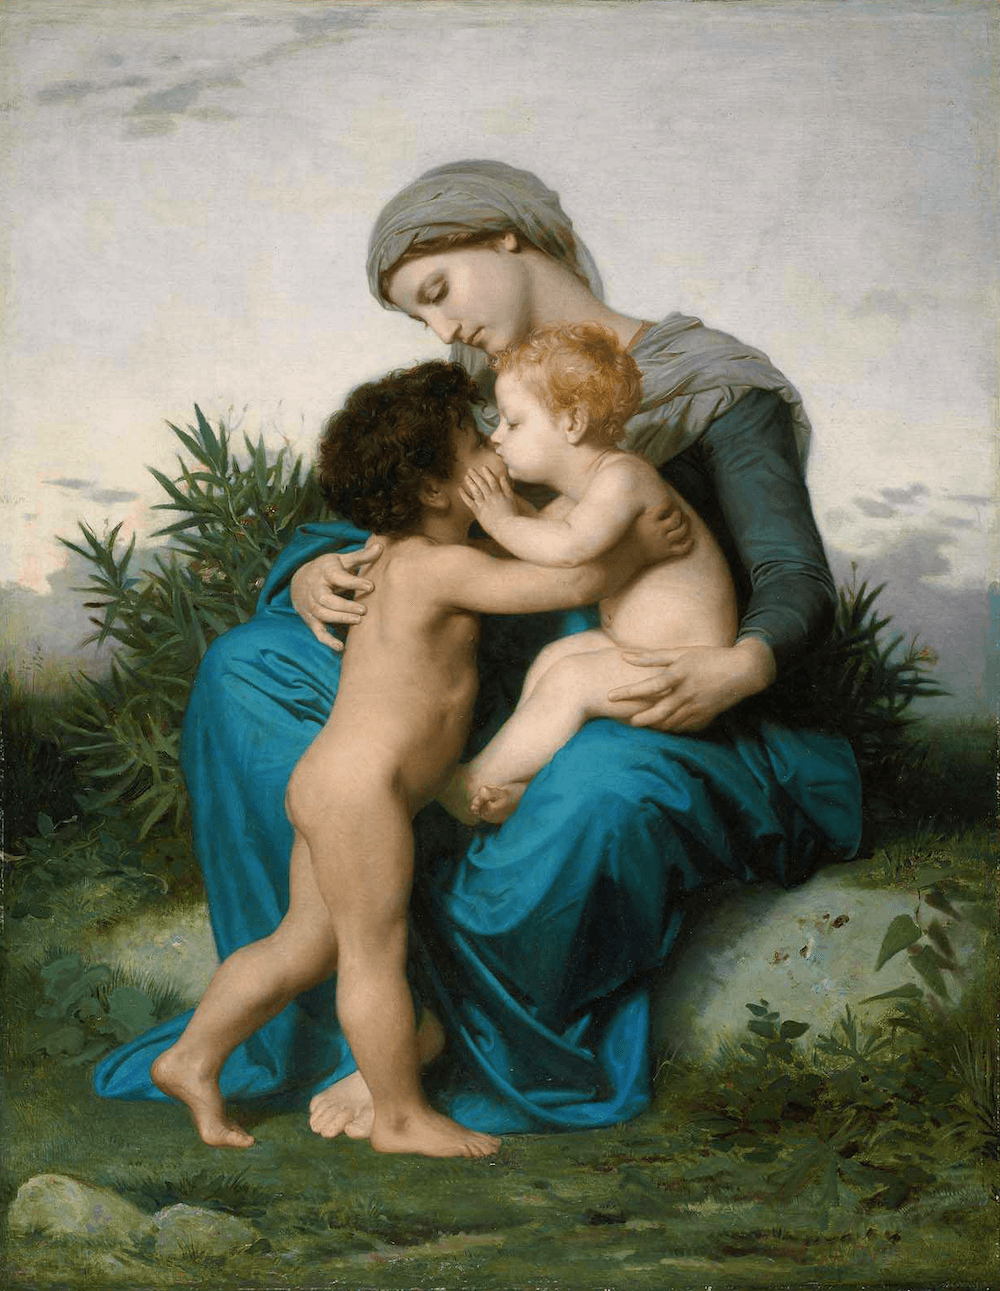 "Fraternal Love," 1851, by William-Adolphe Bouguereau. Oil on canvas; 57.8 inches x 44.7 inches. Museum of Fine Arts, Boston. (Public domain)